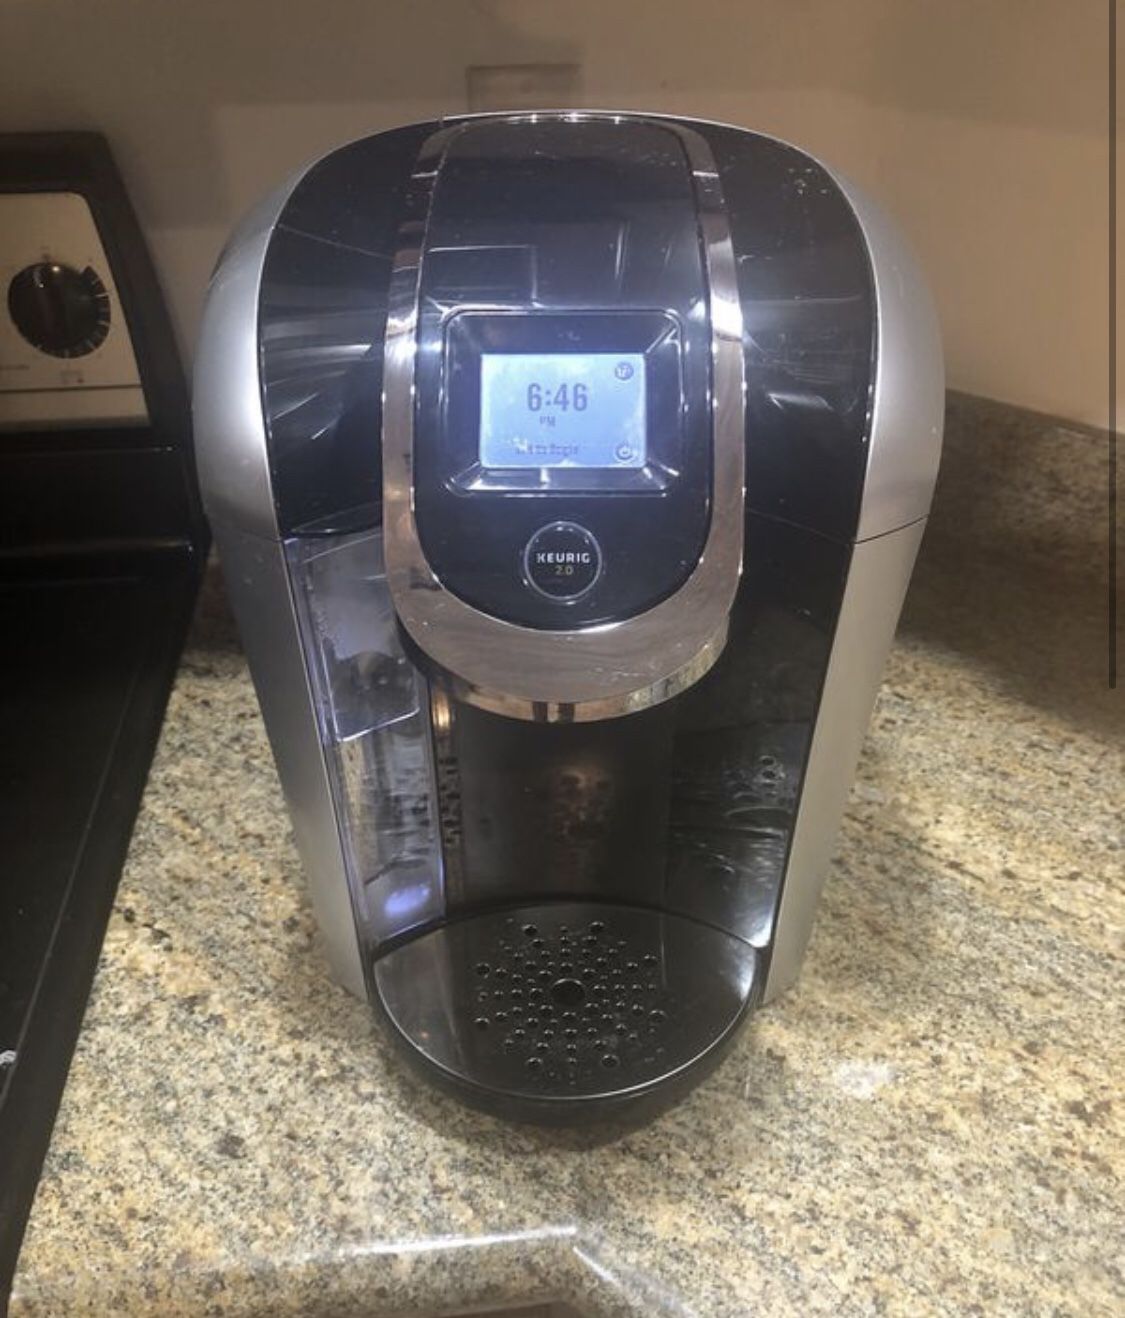 Like New Keurig with 80 oz water reservoir! Carafe included